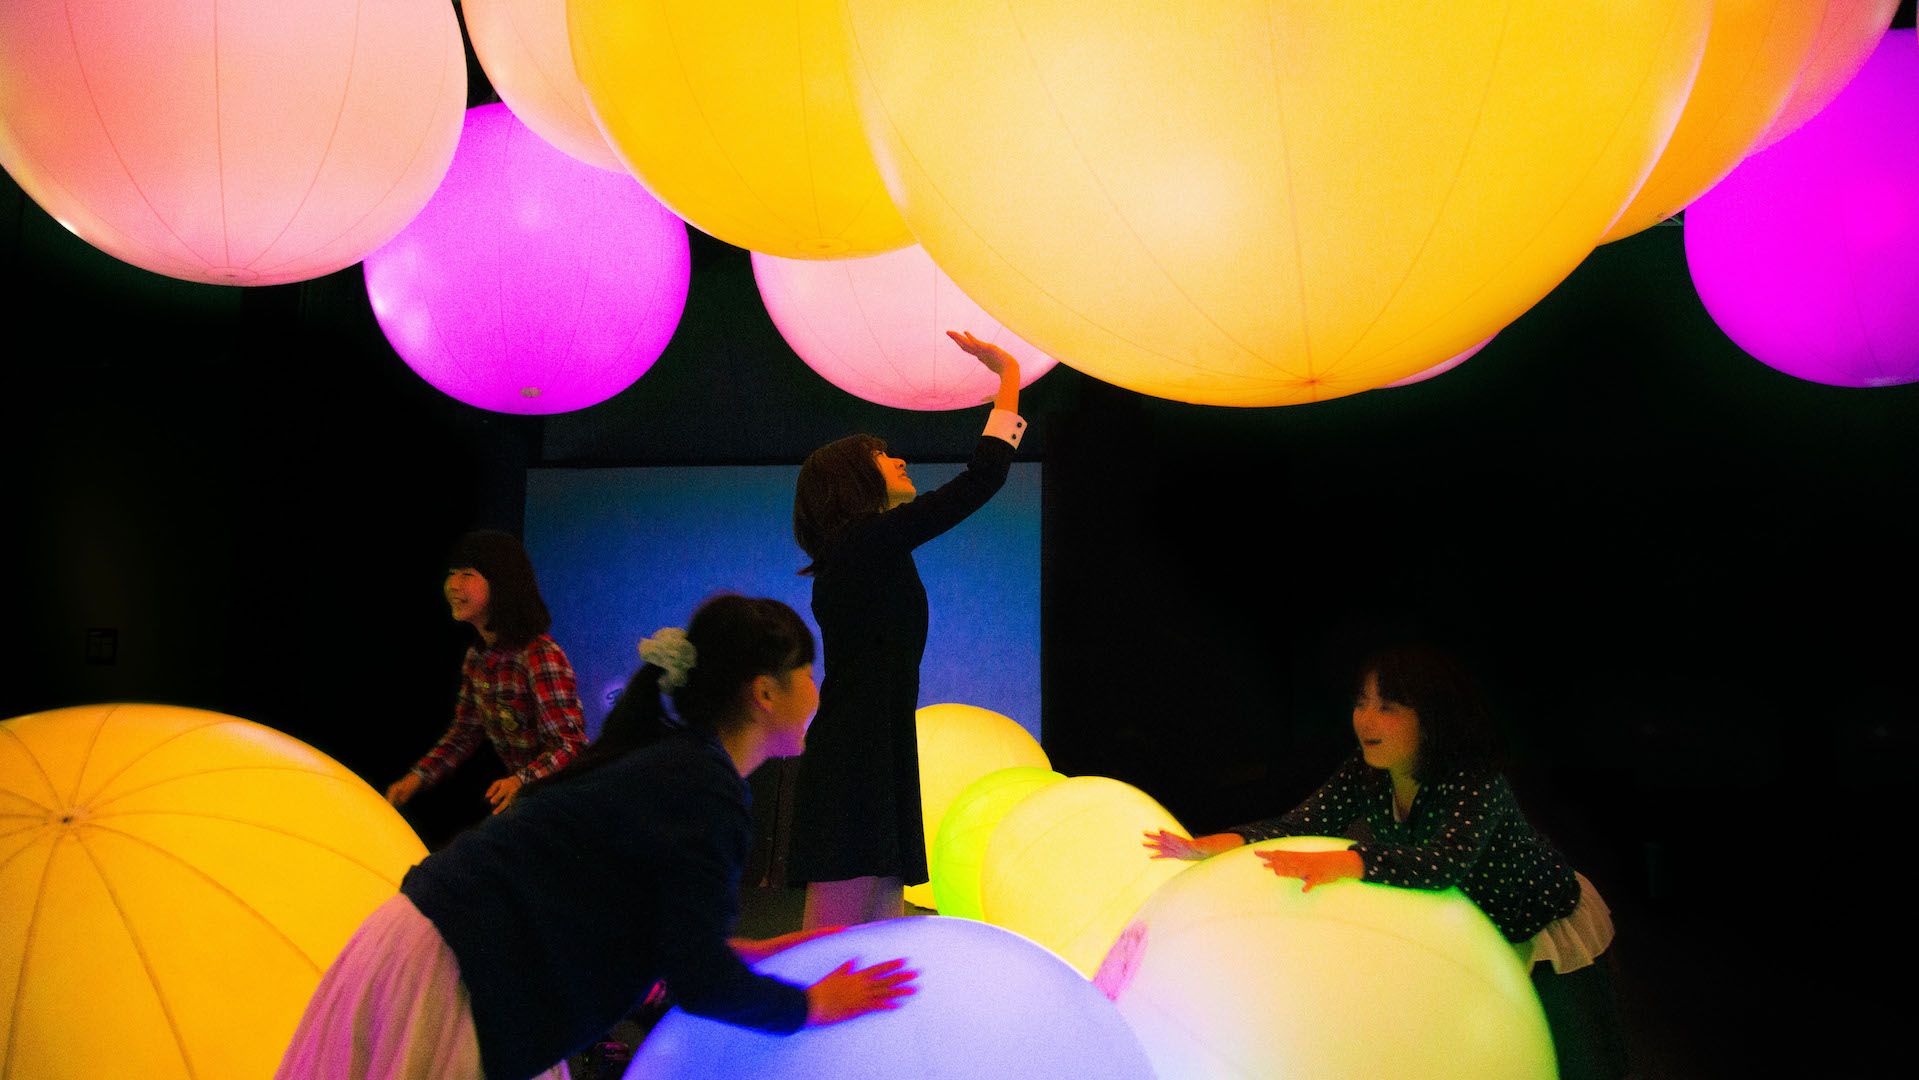 immersive art experiences with LED balloons